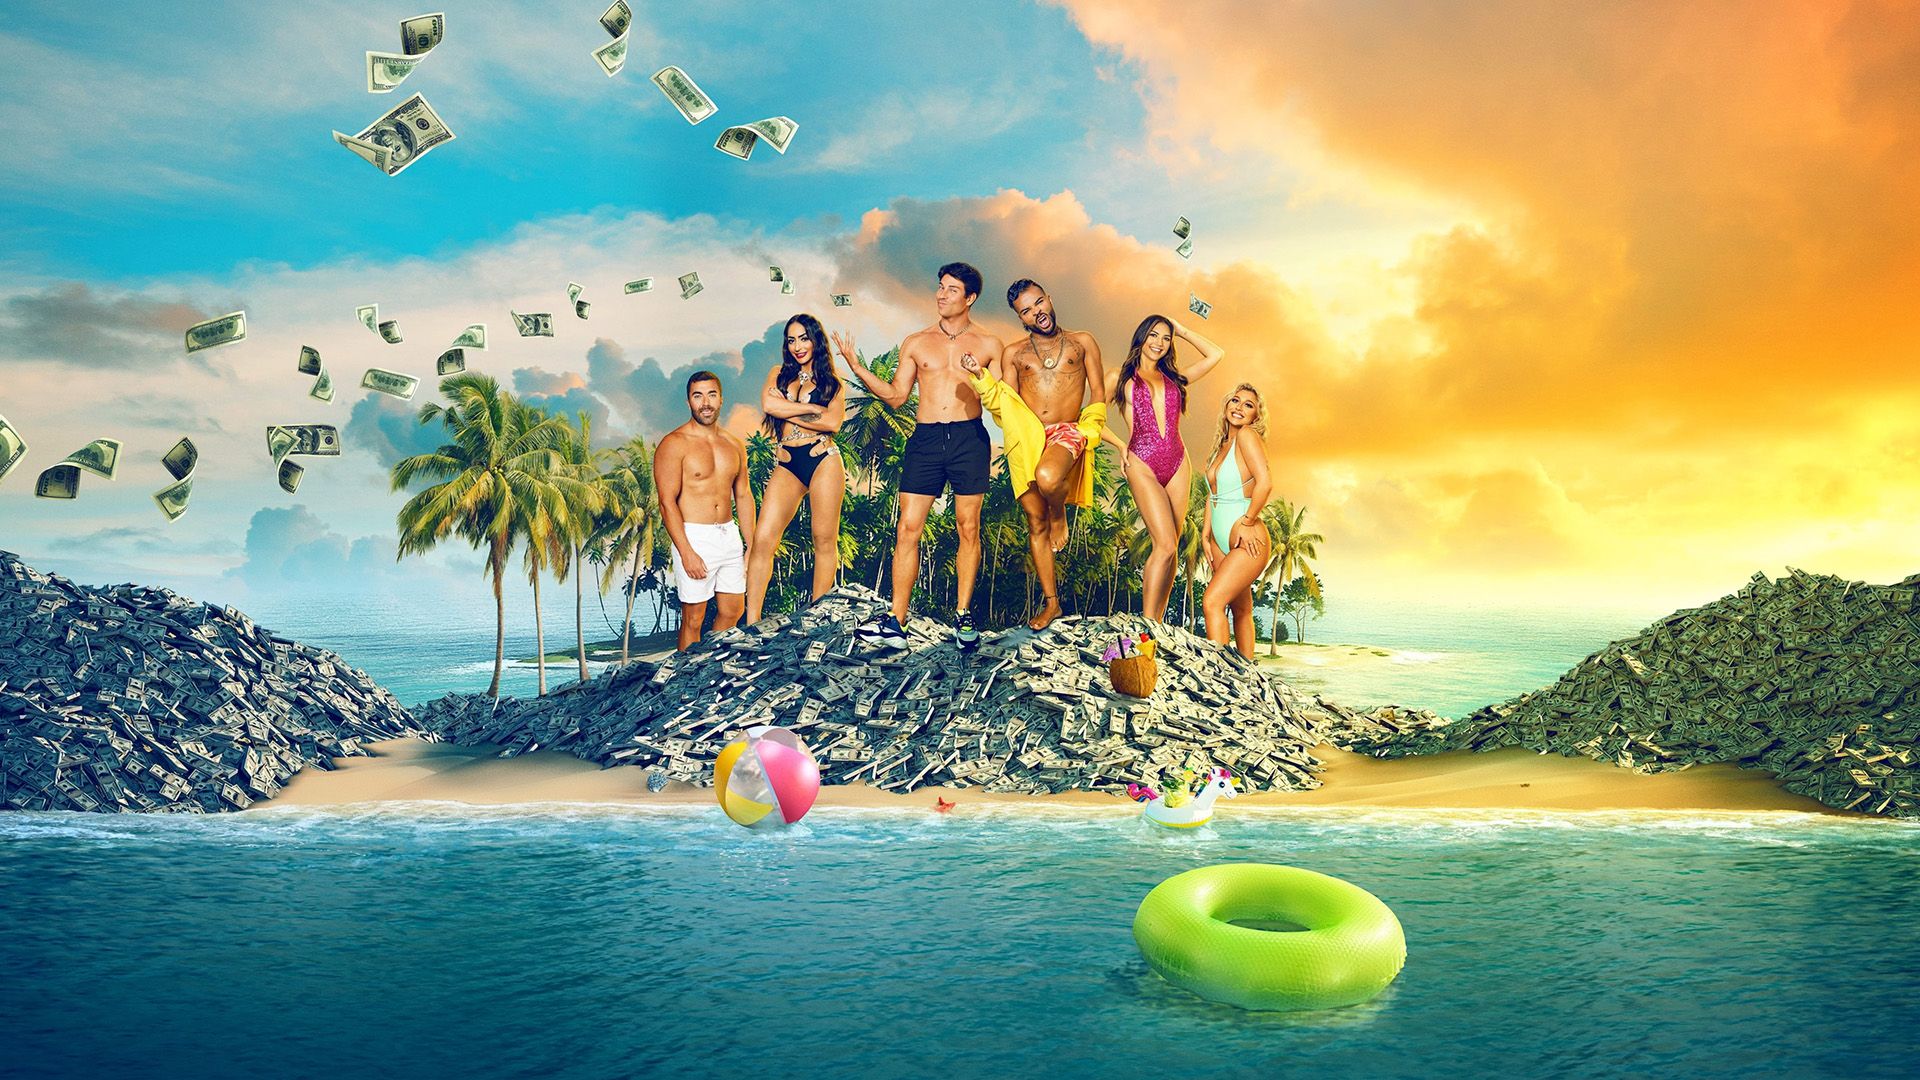 All Star Shore background